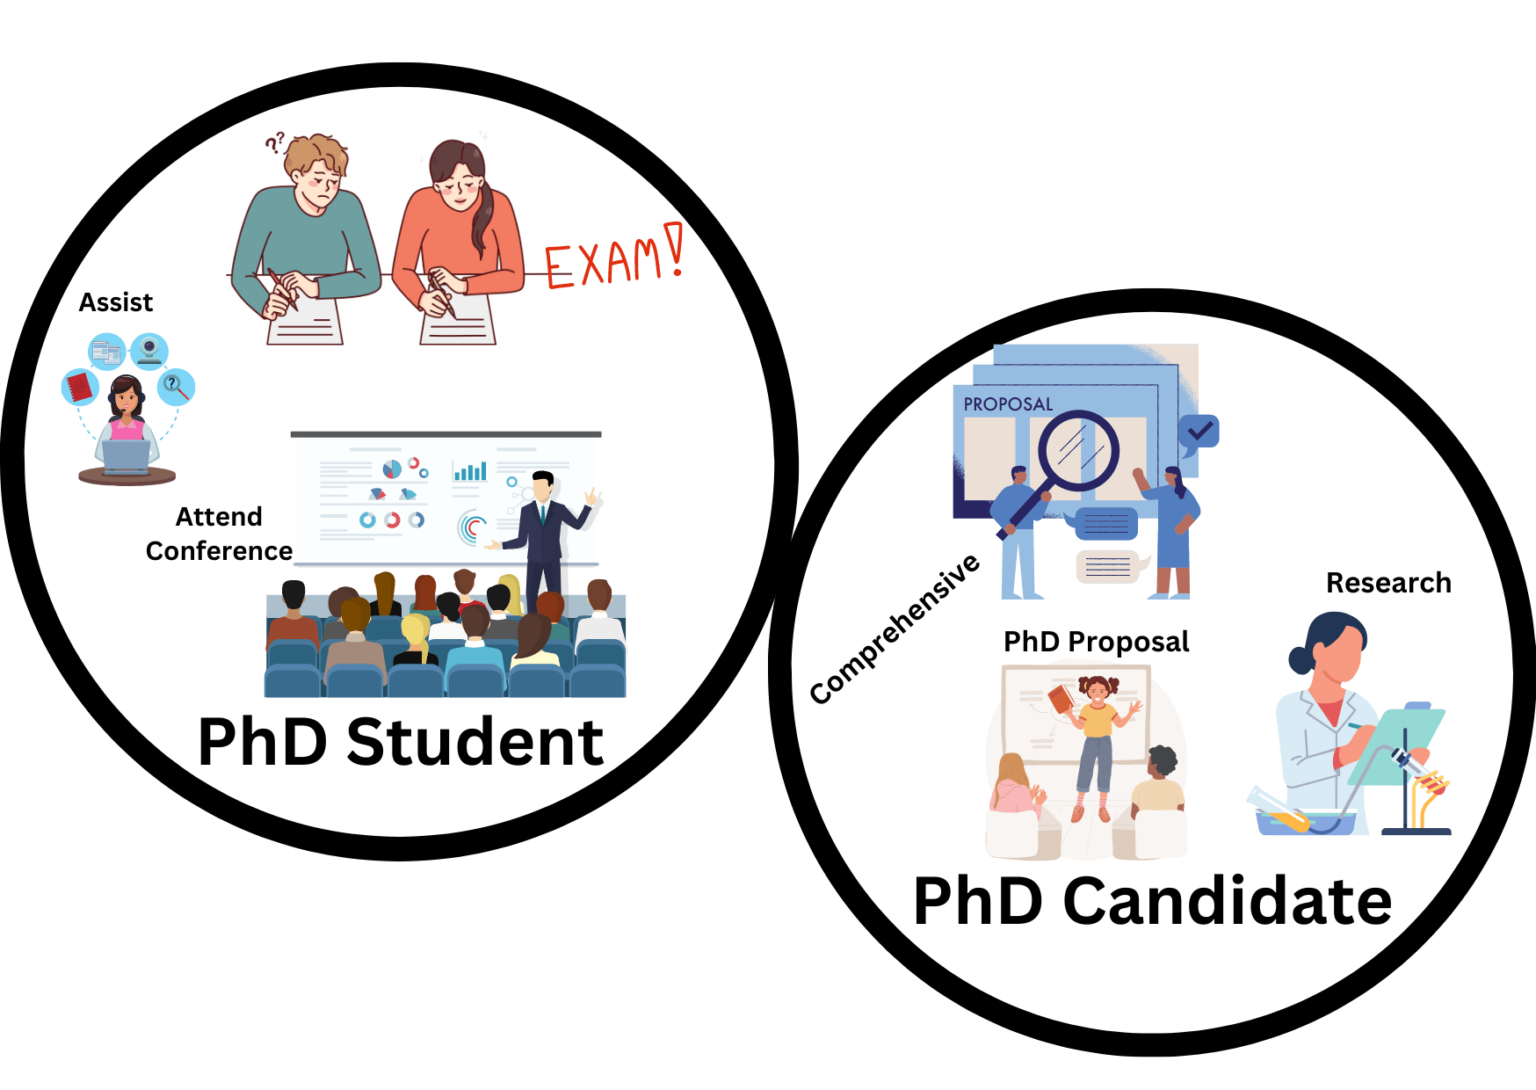 phd candidate or phd student